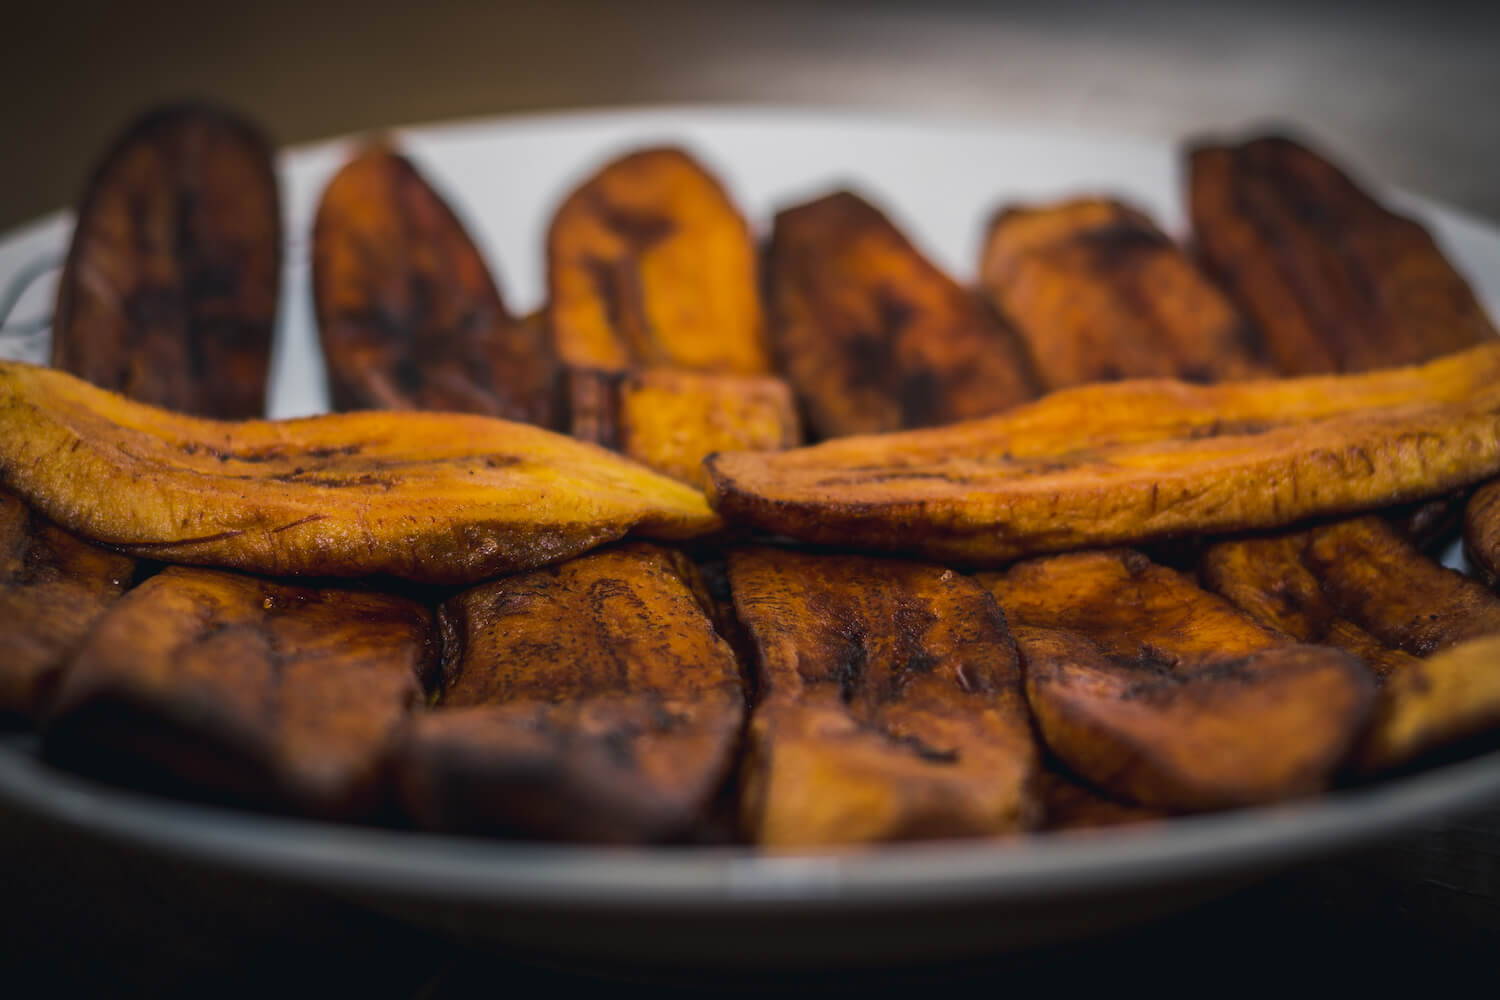 Fried plantains are referred to as dodo in Nigeria, the homeland of Ngo's father.